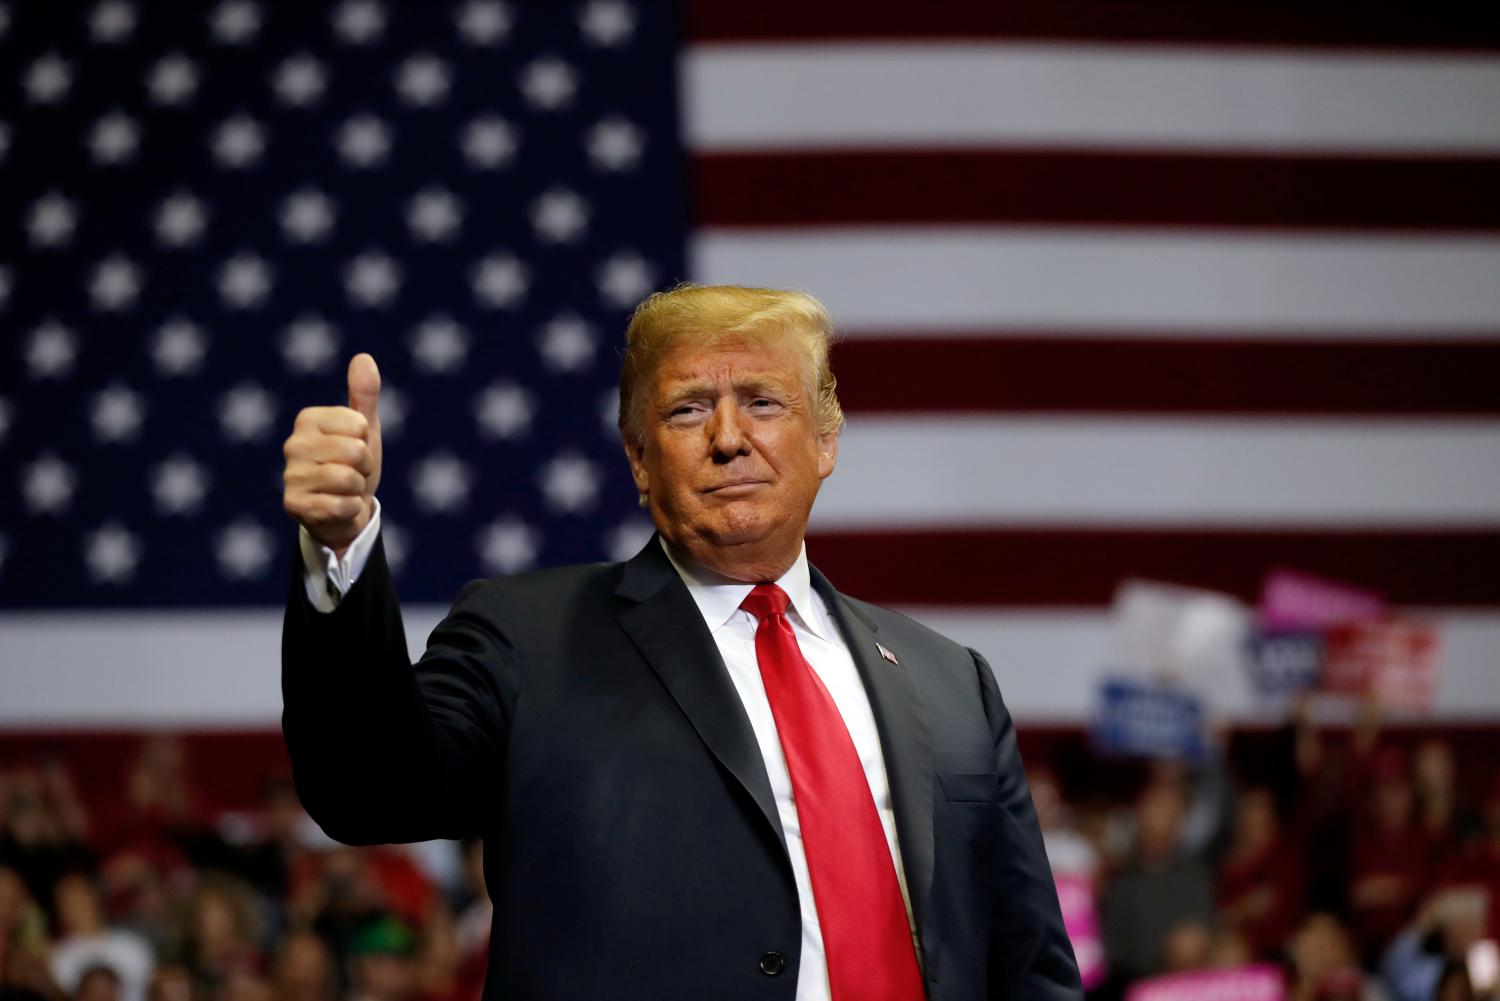 FILE PHOTO: U.S. President Donald Trump gestures to supporters during a campaign rally at the Allen County War Memorial Coliseum in Fort Wayne, Indiana, U.S., November 5, 2018.  REUTERS/Carlos Barria/File Photo - RC13BA61D600